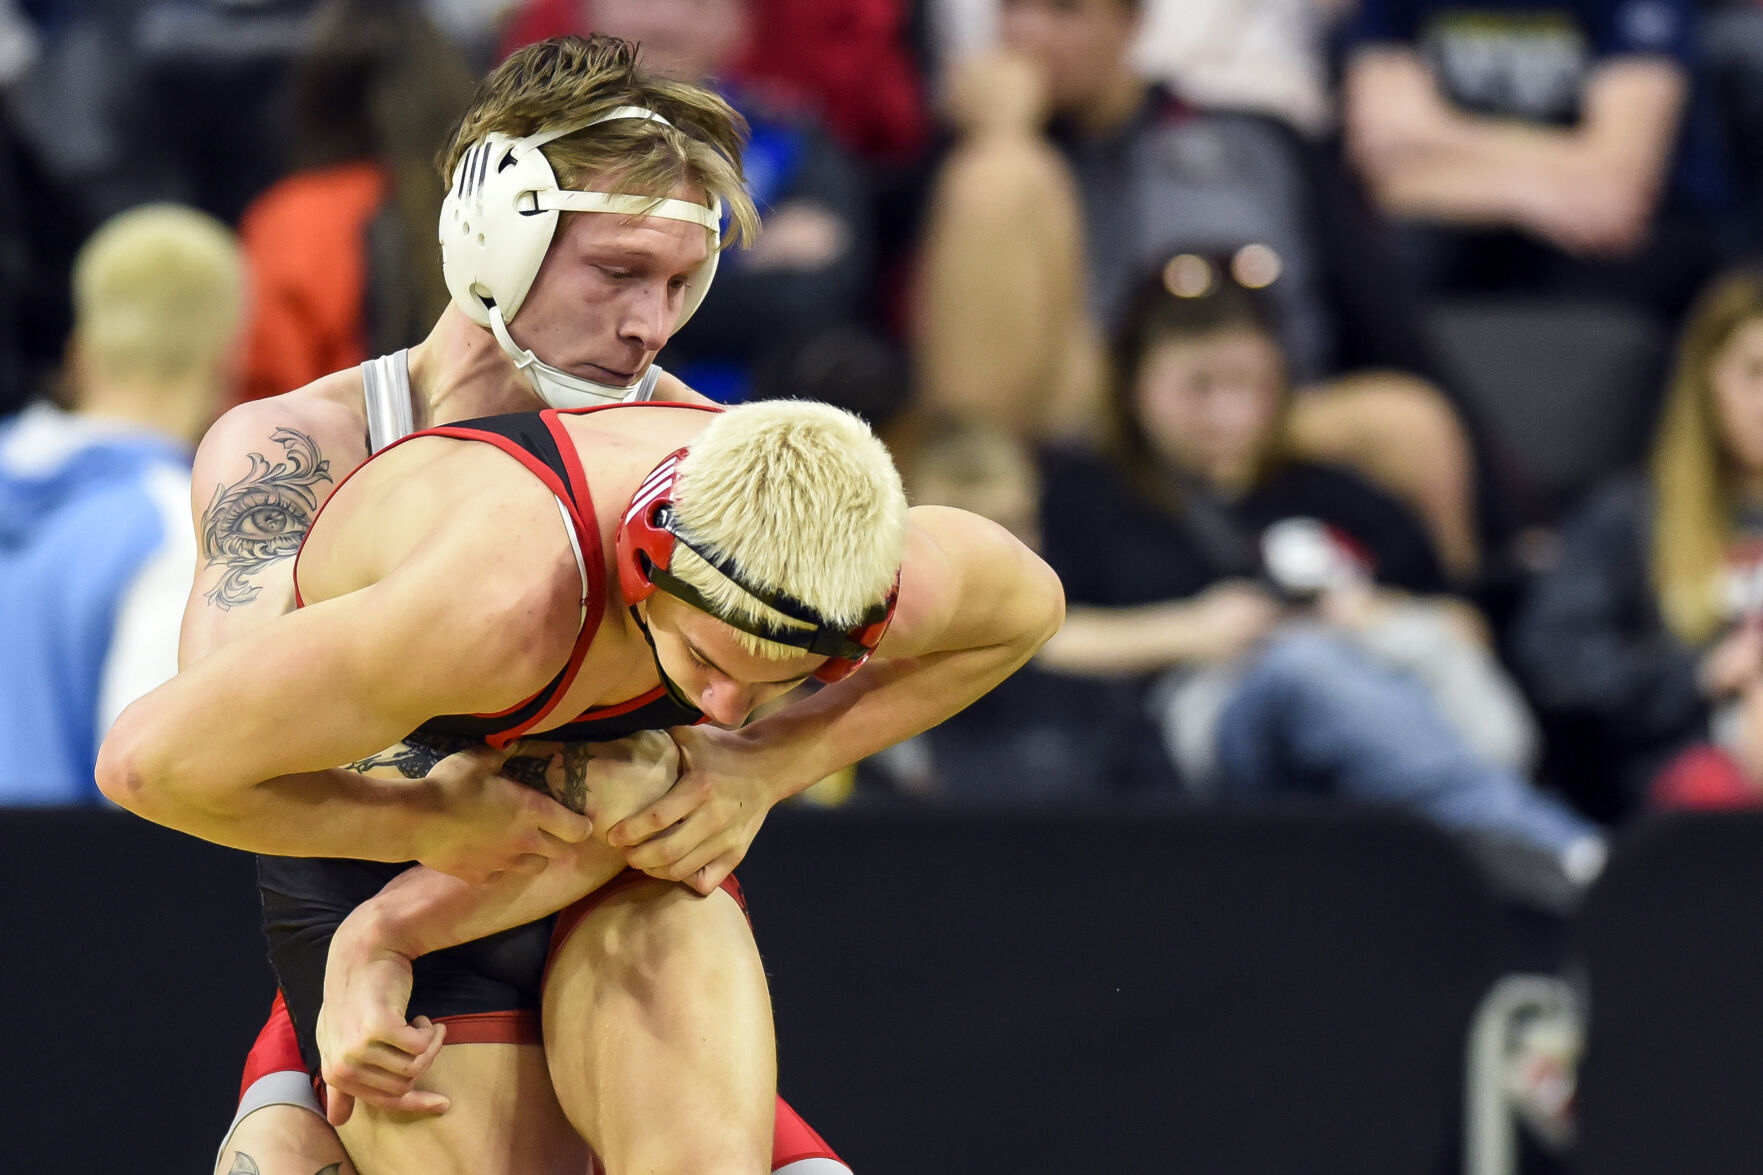 Sturgis Brown Dominates Day 1 of Class A State Wrestling Tournament with Seven Grapplers Advancing to Semifinals